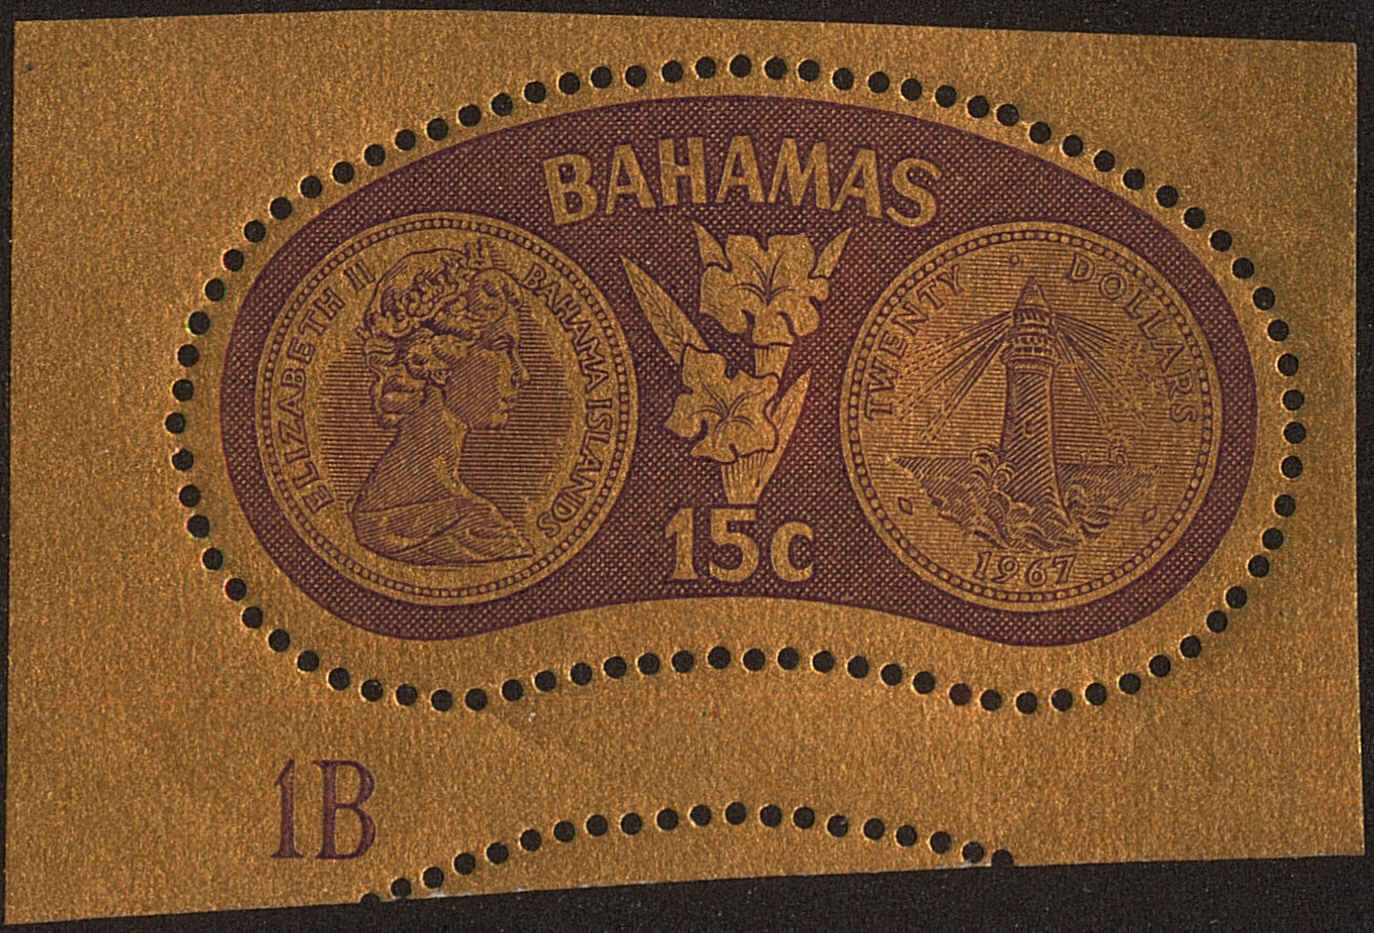 Front view of Bahamas 286 collectors stamp